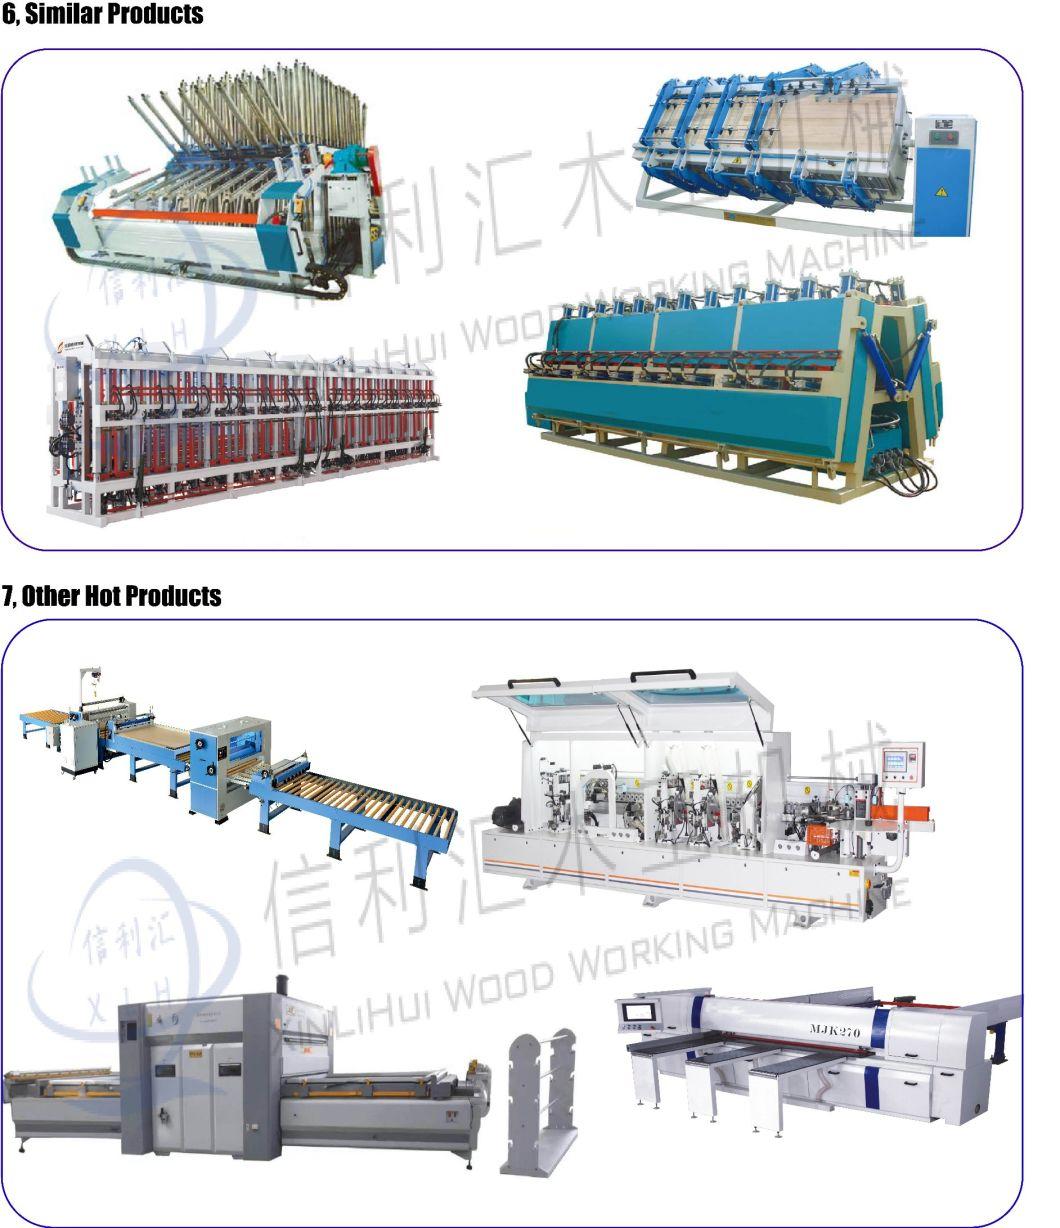 Automatic Hot Press Wood Finger Jointer Machine/ Heat-Transfer Oil Wood Jointing Machine with Conveyor Feeder/ Wood Finger Joint Laminated Hot Press Machine